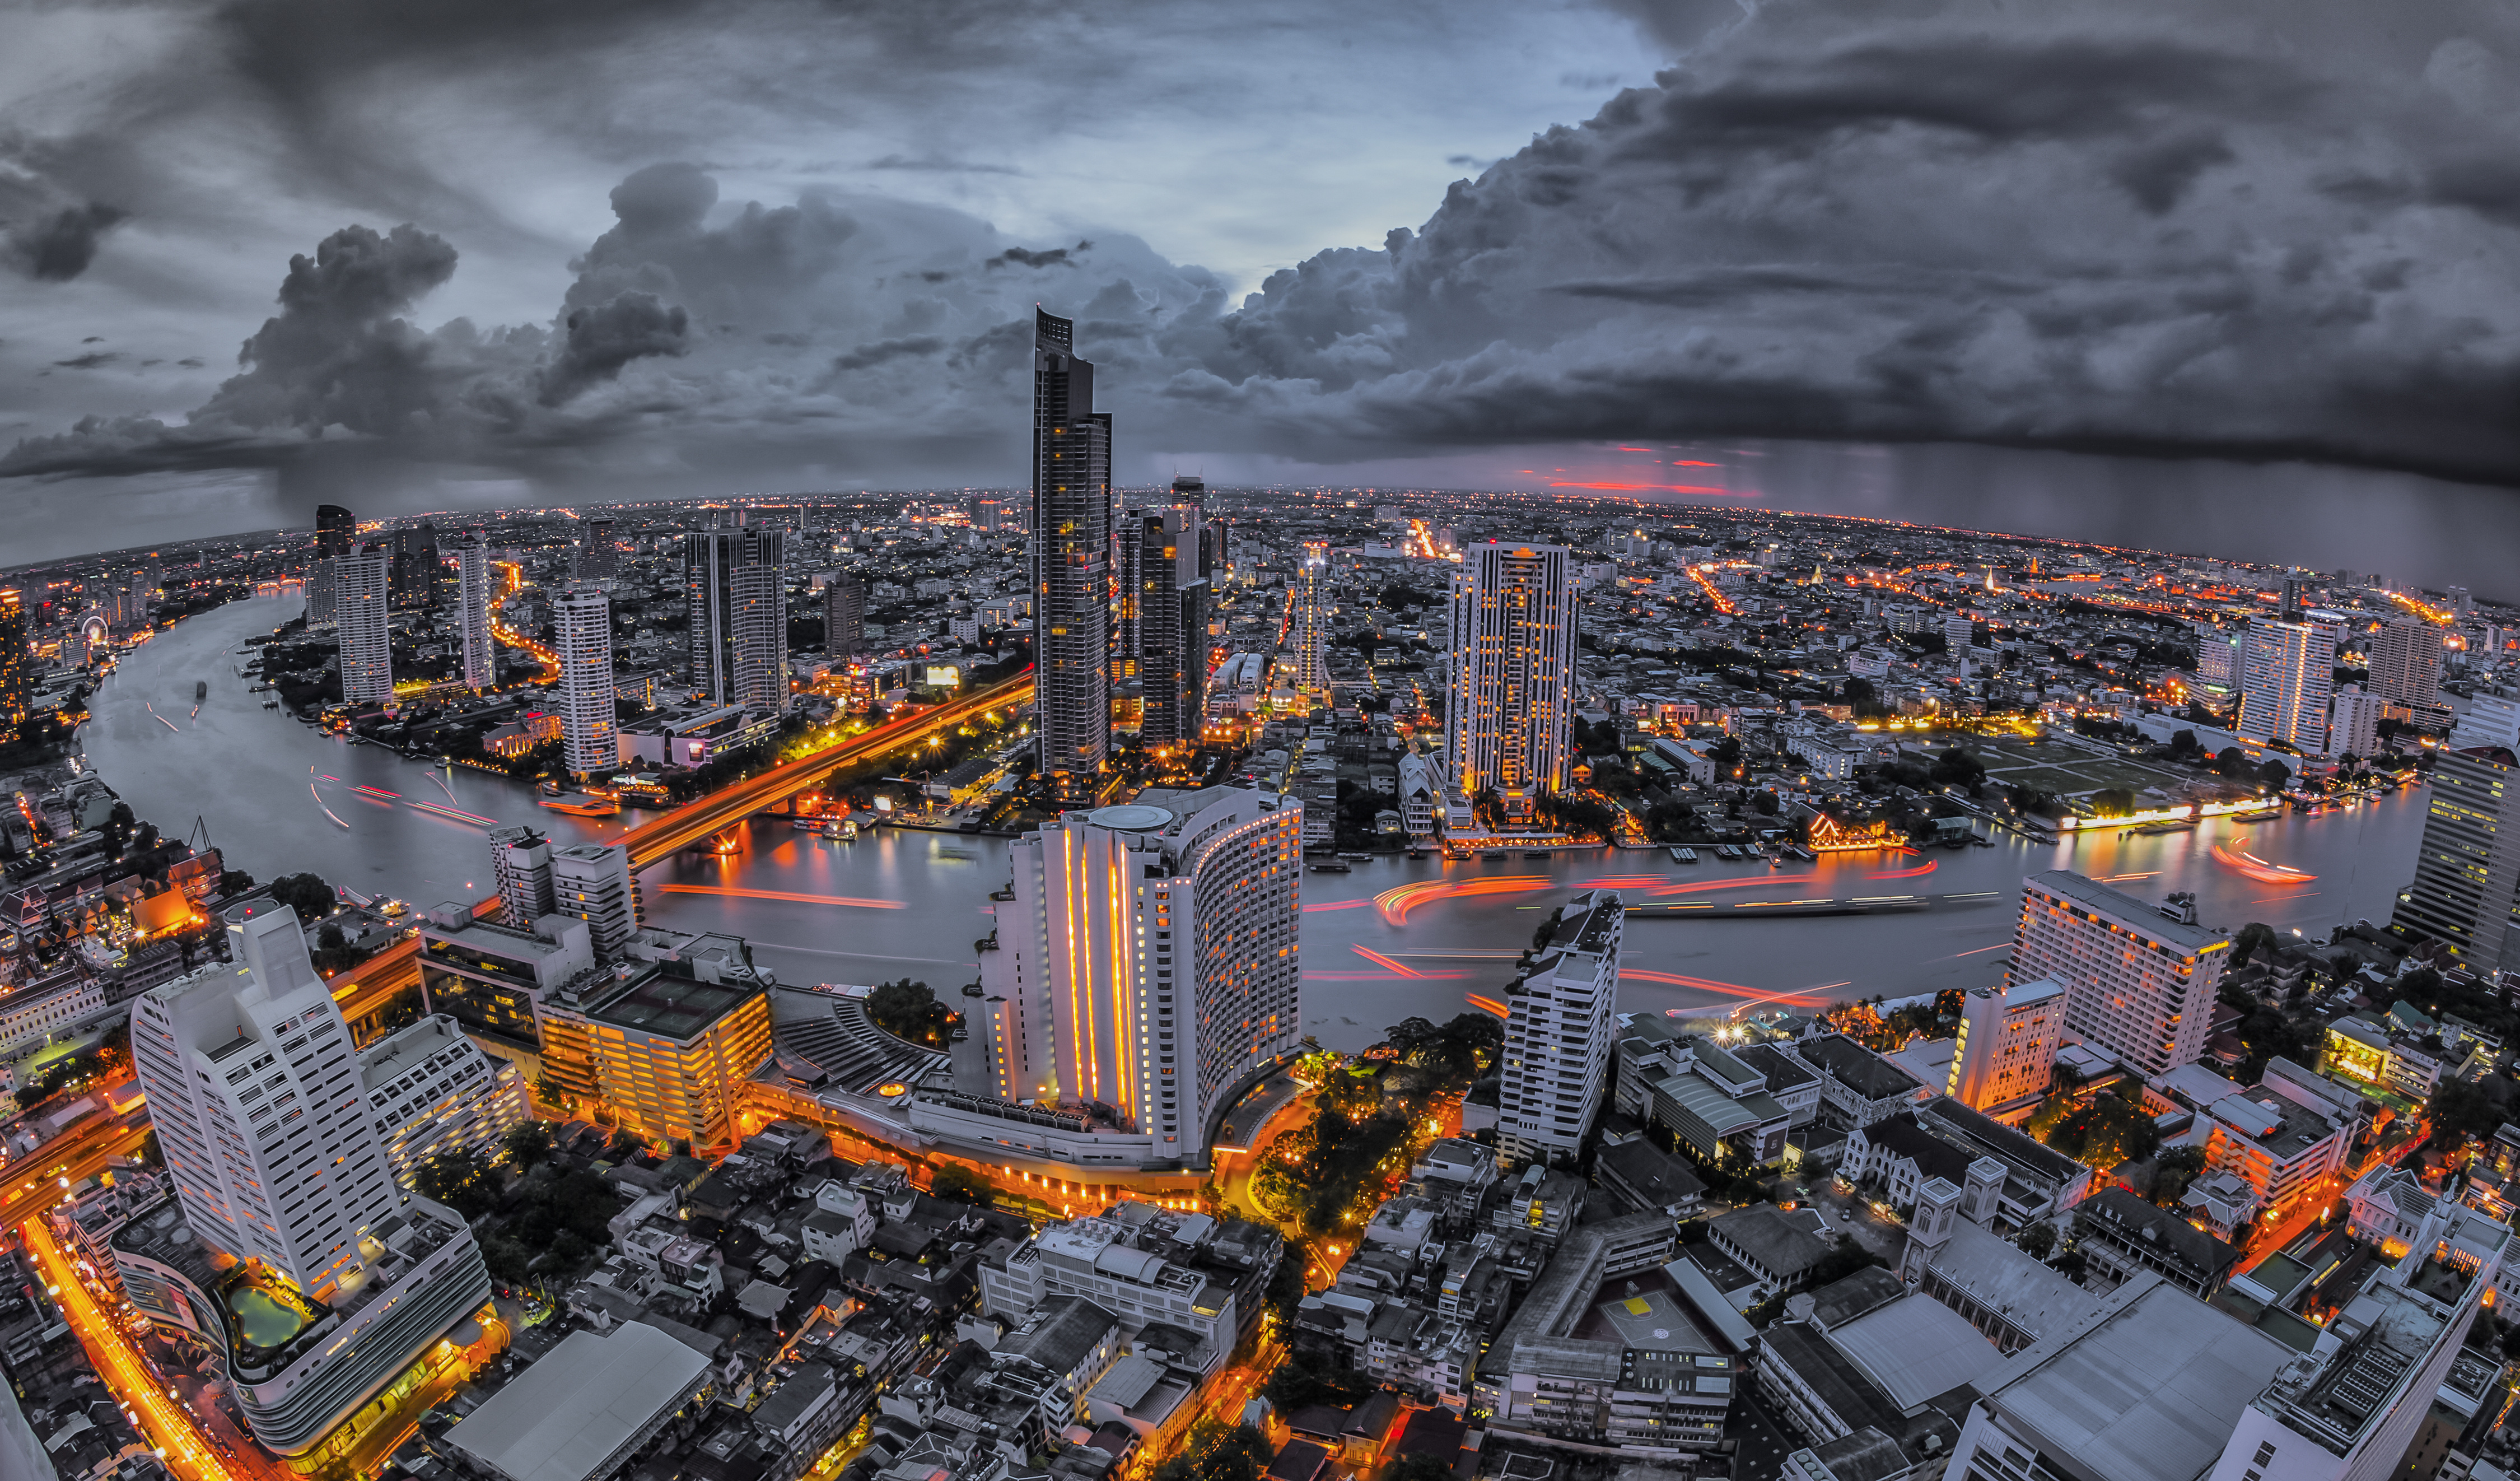 cities, bangkok, view from above, night city, skyscrapers, megapolis, megalopolis High Definition image